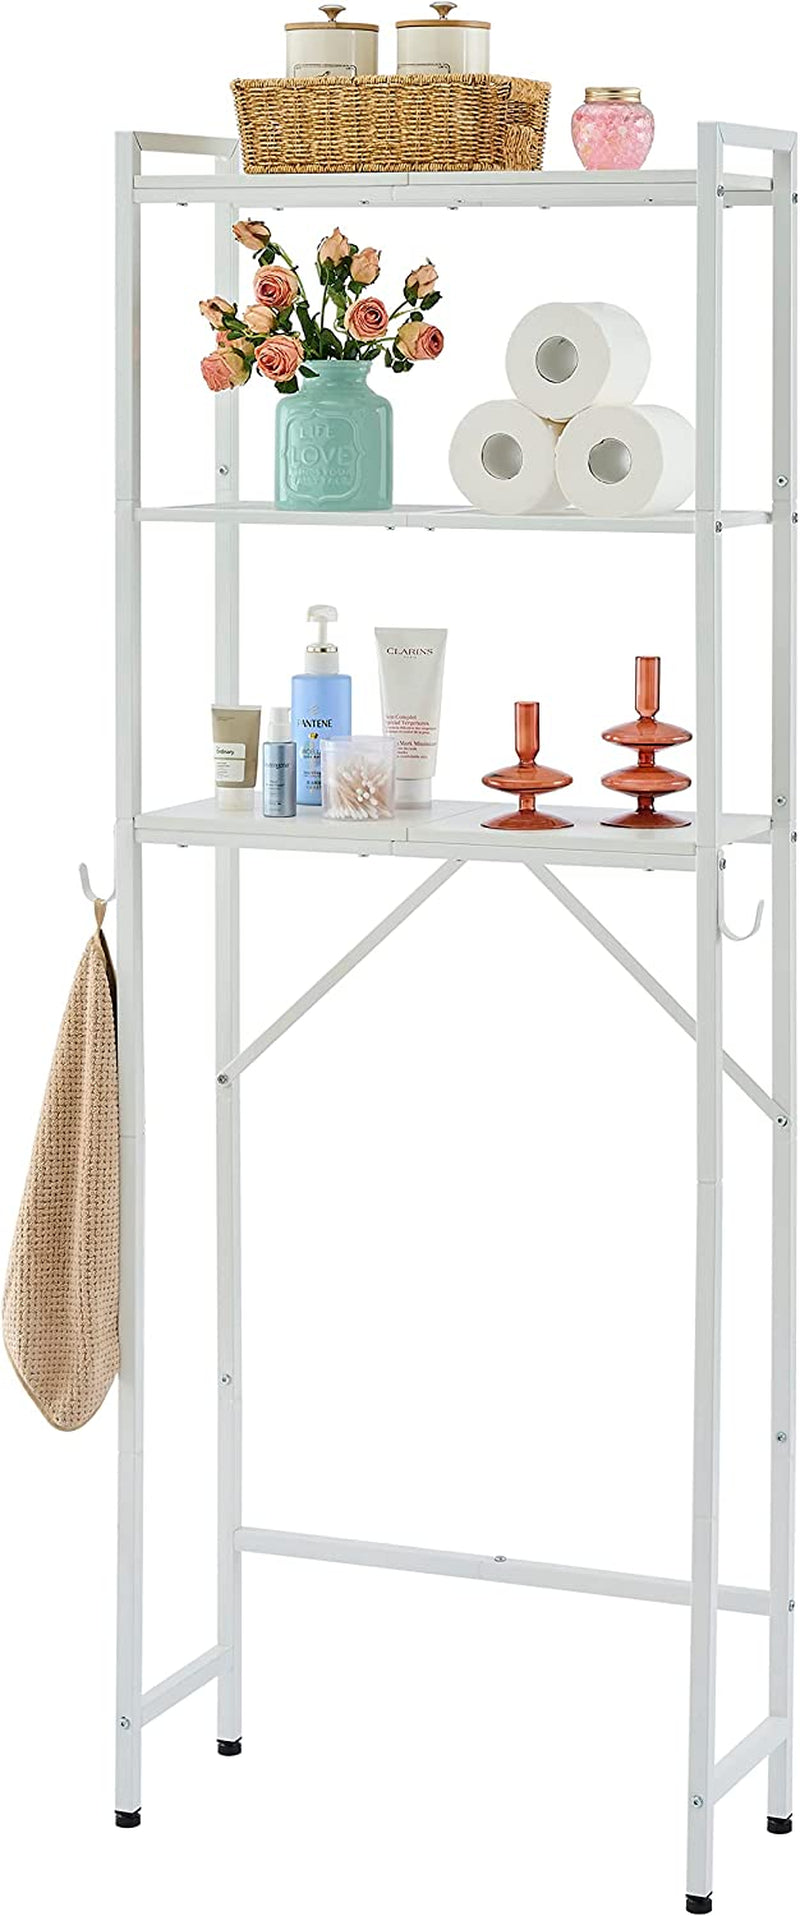 Hoctieon 3-Tier over the Toilet Storage,Wood Bathroom Shelf over Toilet,Multifunctional Space Saver Bathroom Organizer,Splicing Metal Freestanding Toilet Rack with Hook,Washroom Shelves,Can Be Fixed. Home & Garden > Household Supplies > Storage & Organization Hoctieon White  